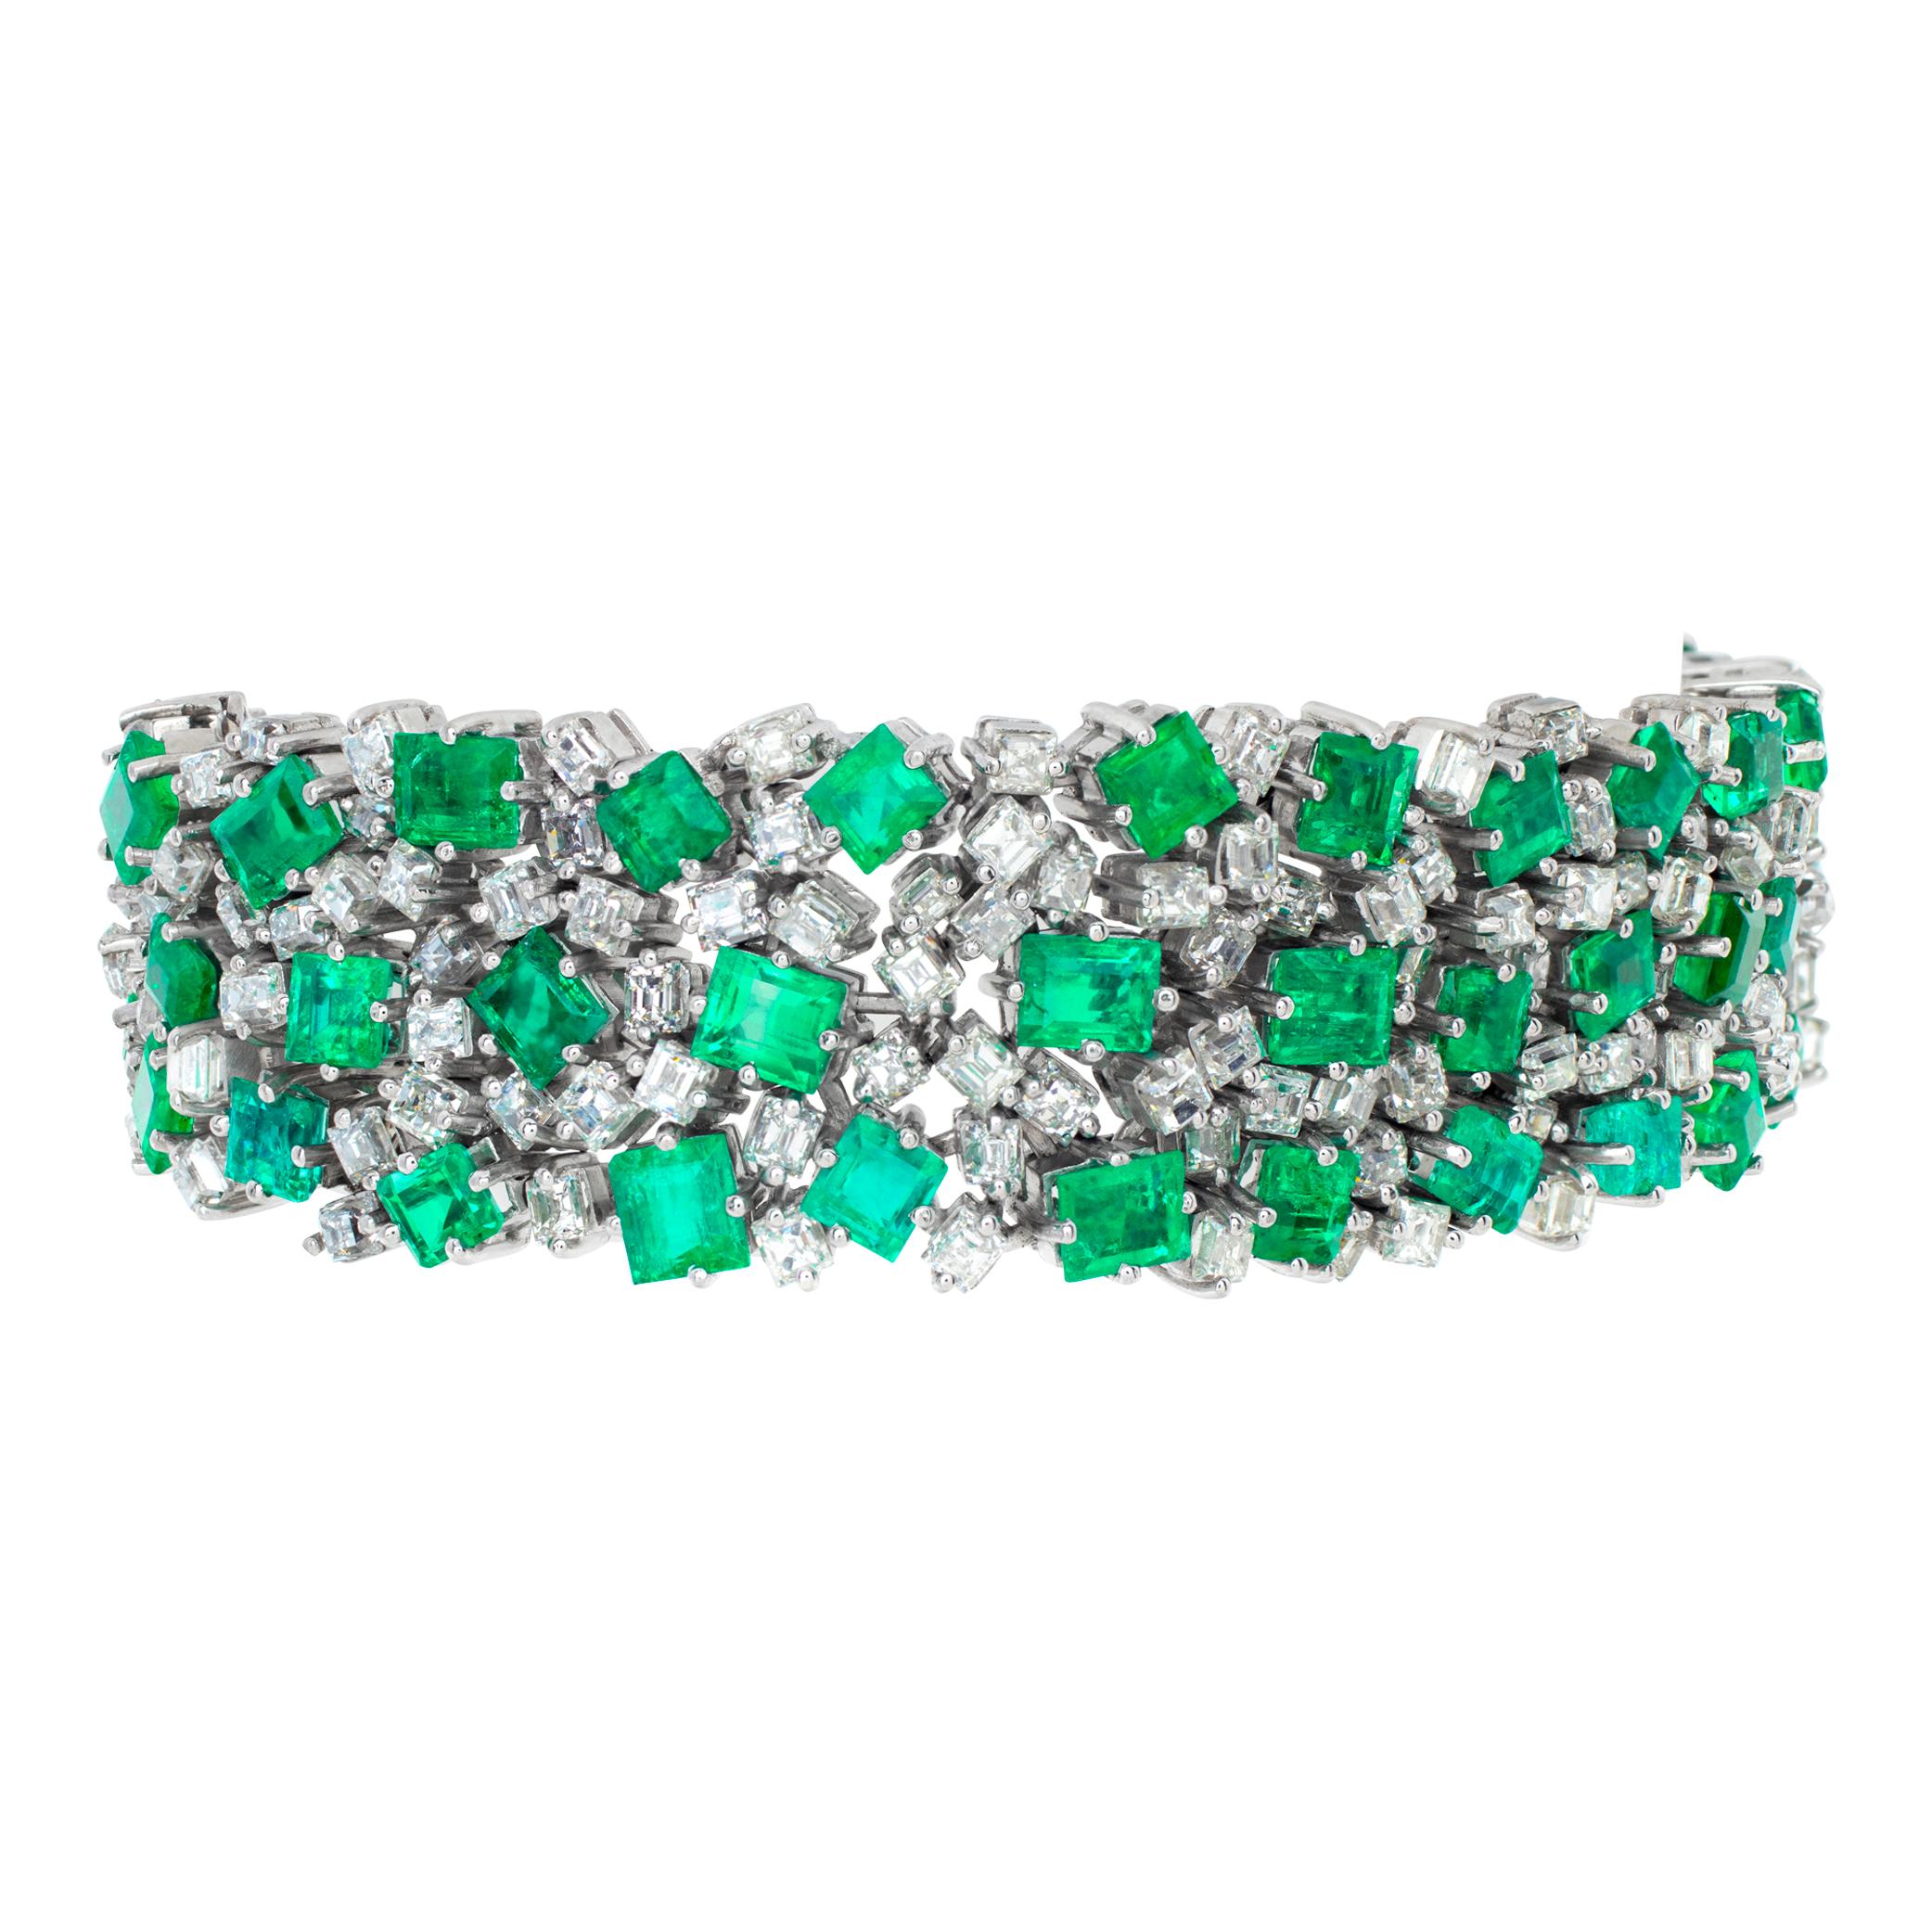 Vintage diamond and emerald platinum bracelet with over 17 carats in diamonds (H, VS) and 32 carats in Columbian emeralds. Length: 7 inches. Width tapers from 0.75 to 0.50 inches
